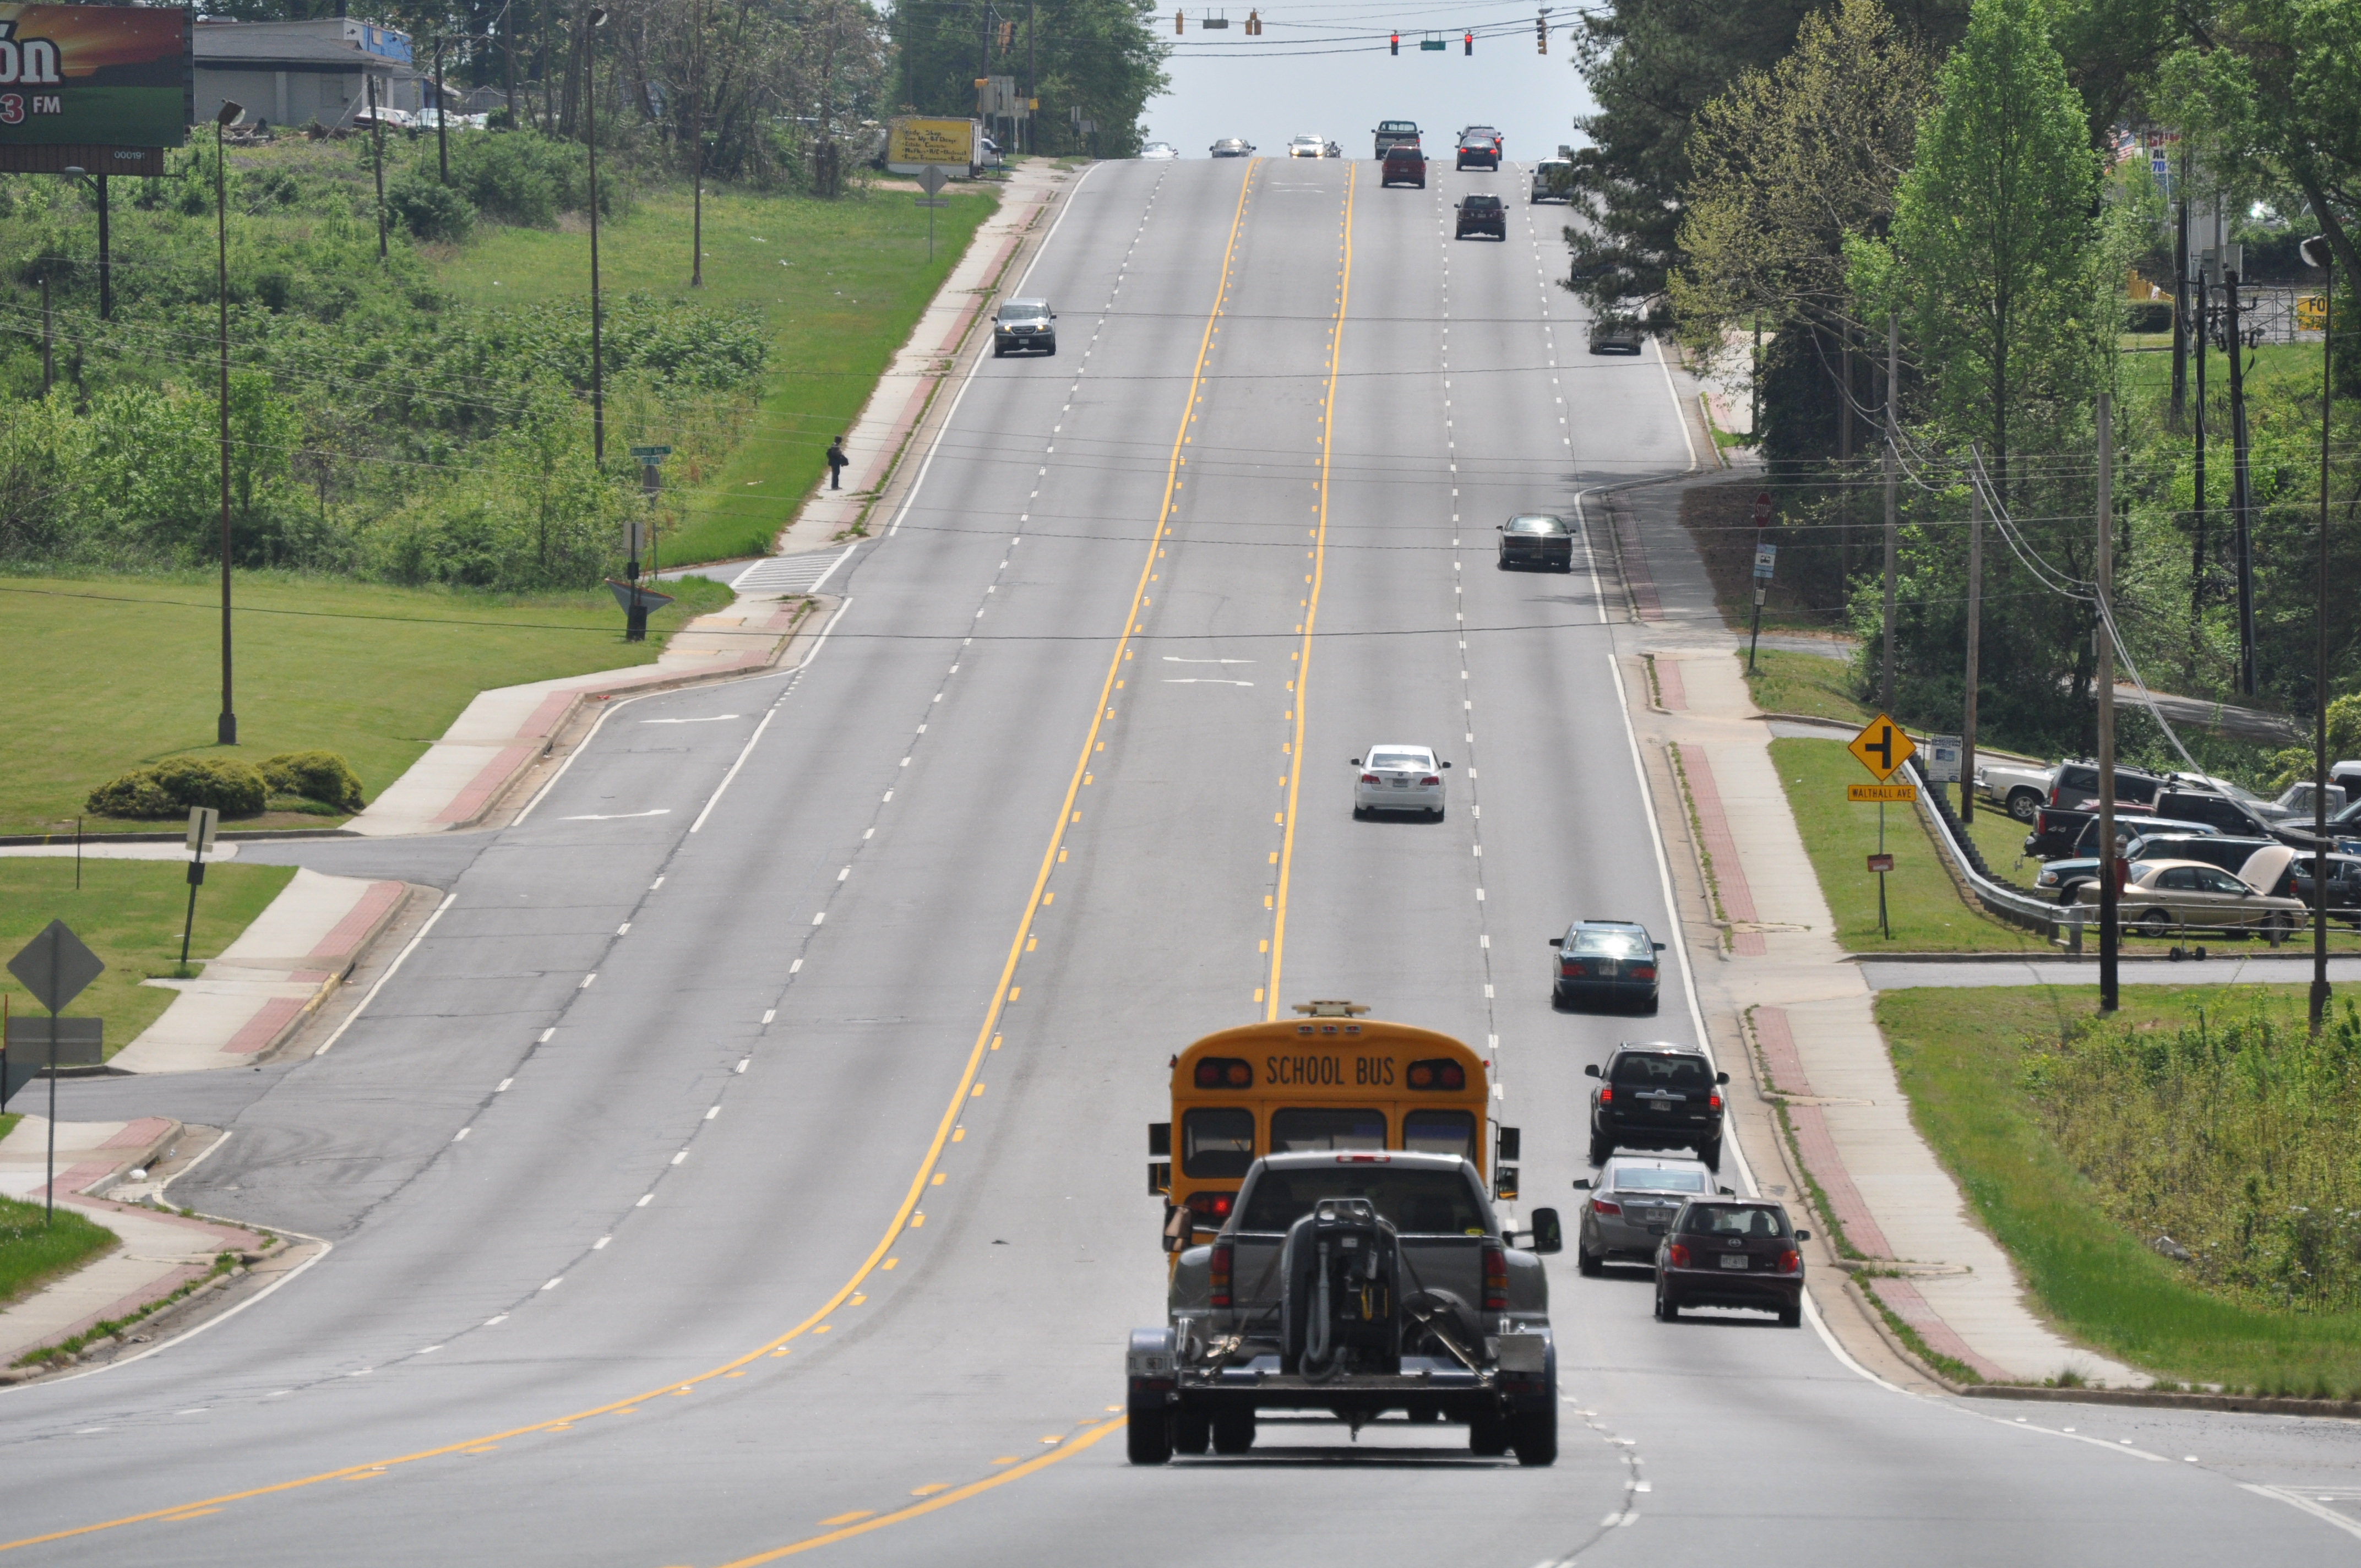 Large 6 lane road in Atlanta shows how inhospitable sprawl can be for public transit